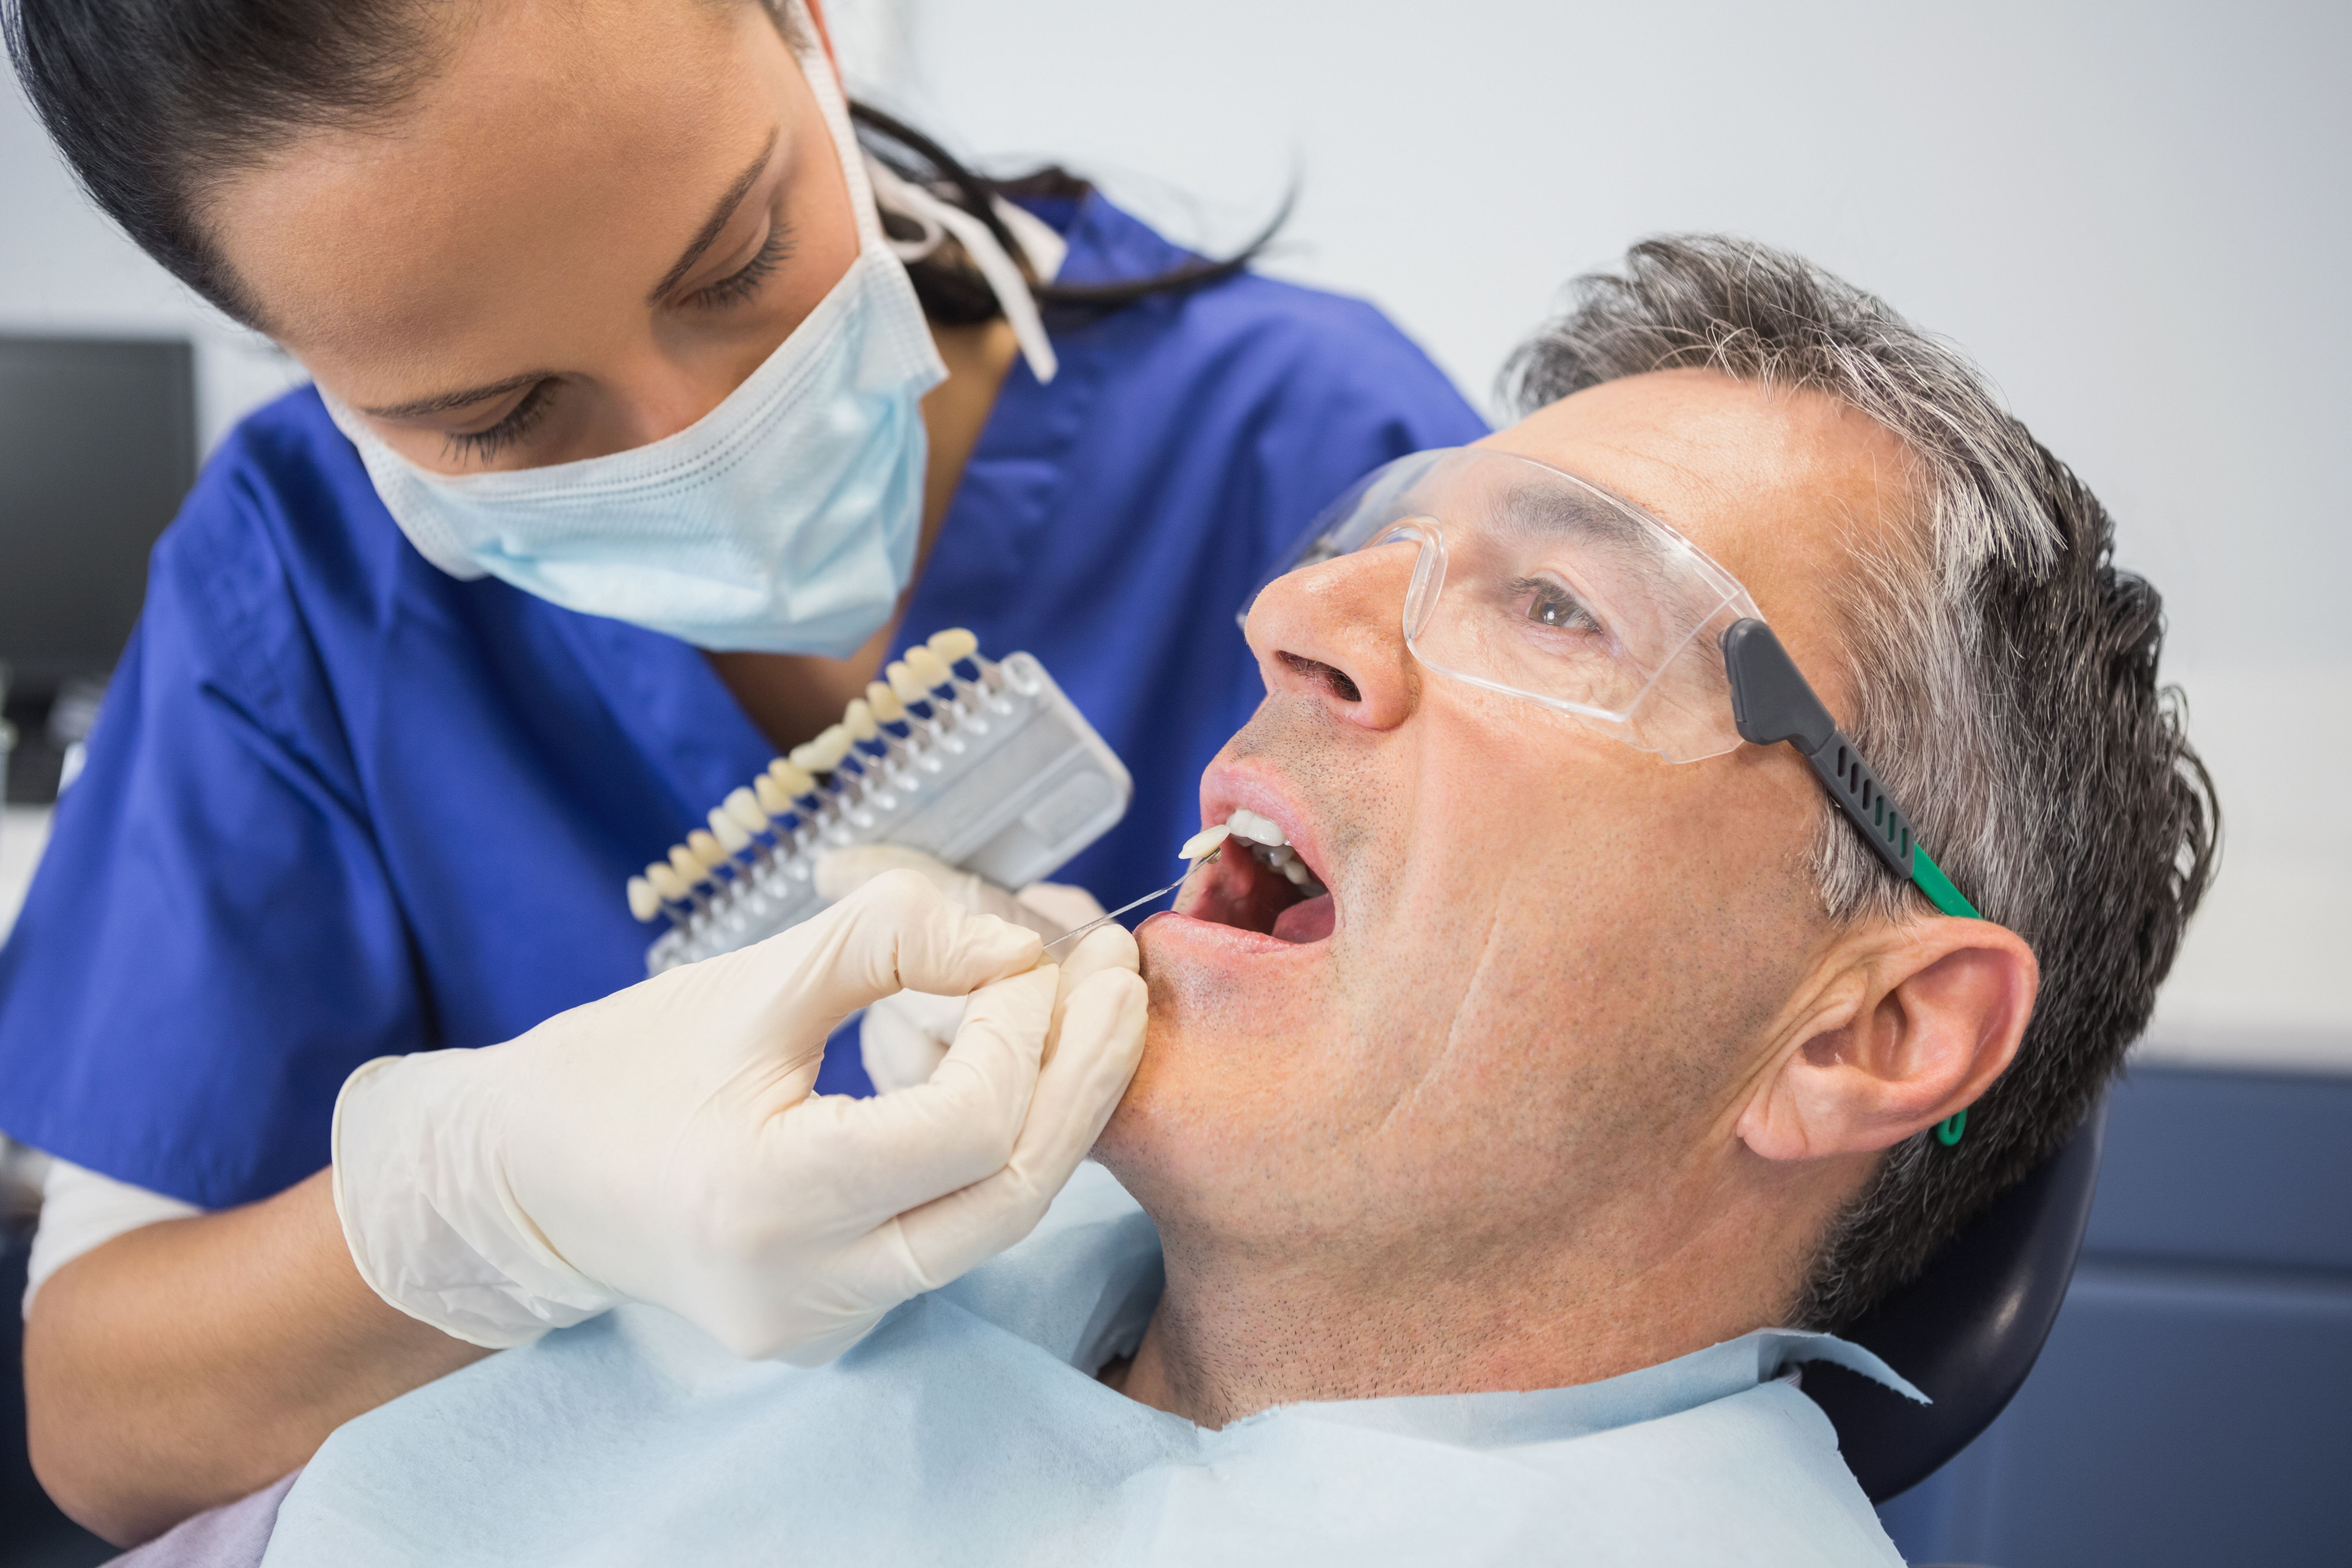 Philadelphia dentist performs cosmetic dental surgery, placing implants in mouth of patient in dentist’s office chair.